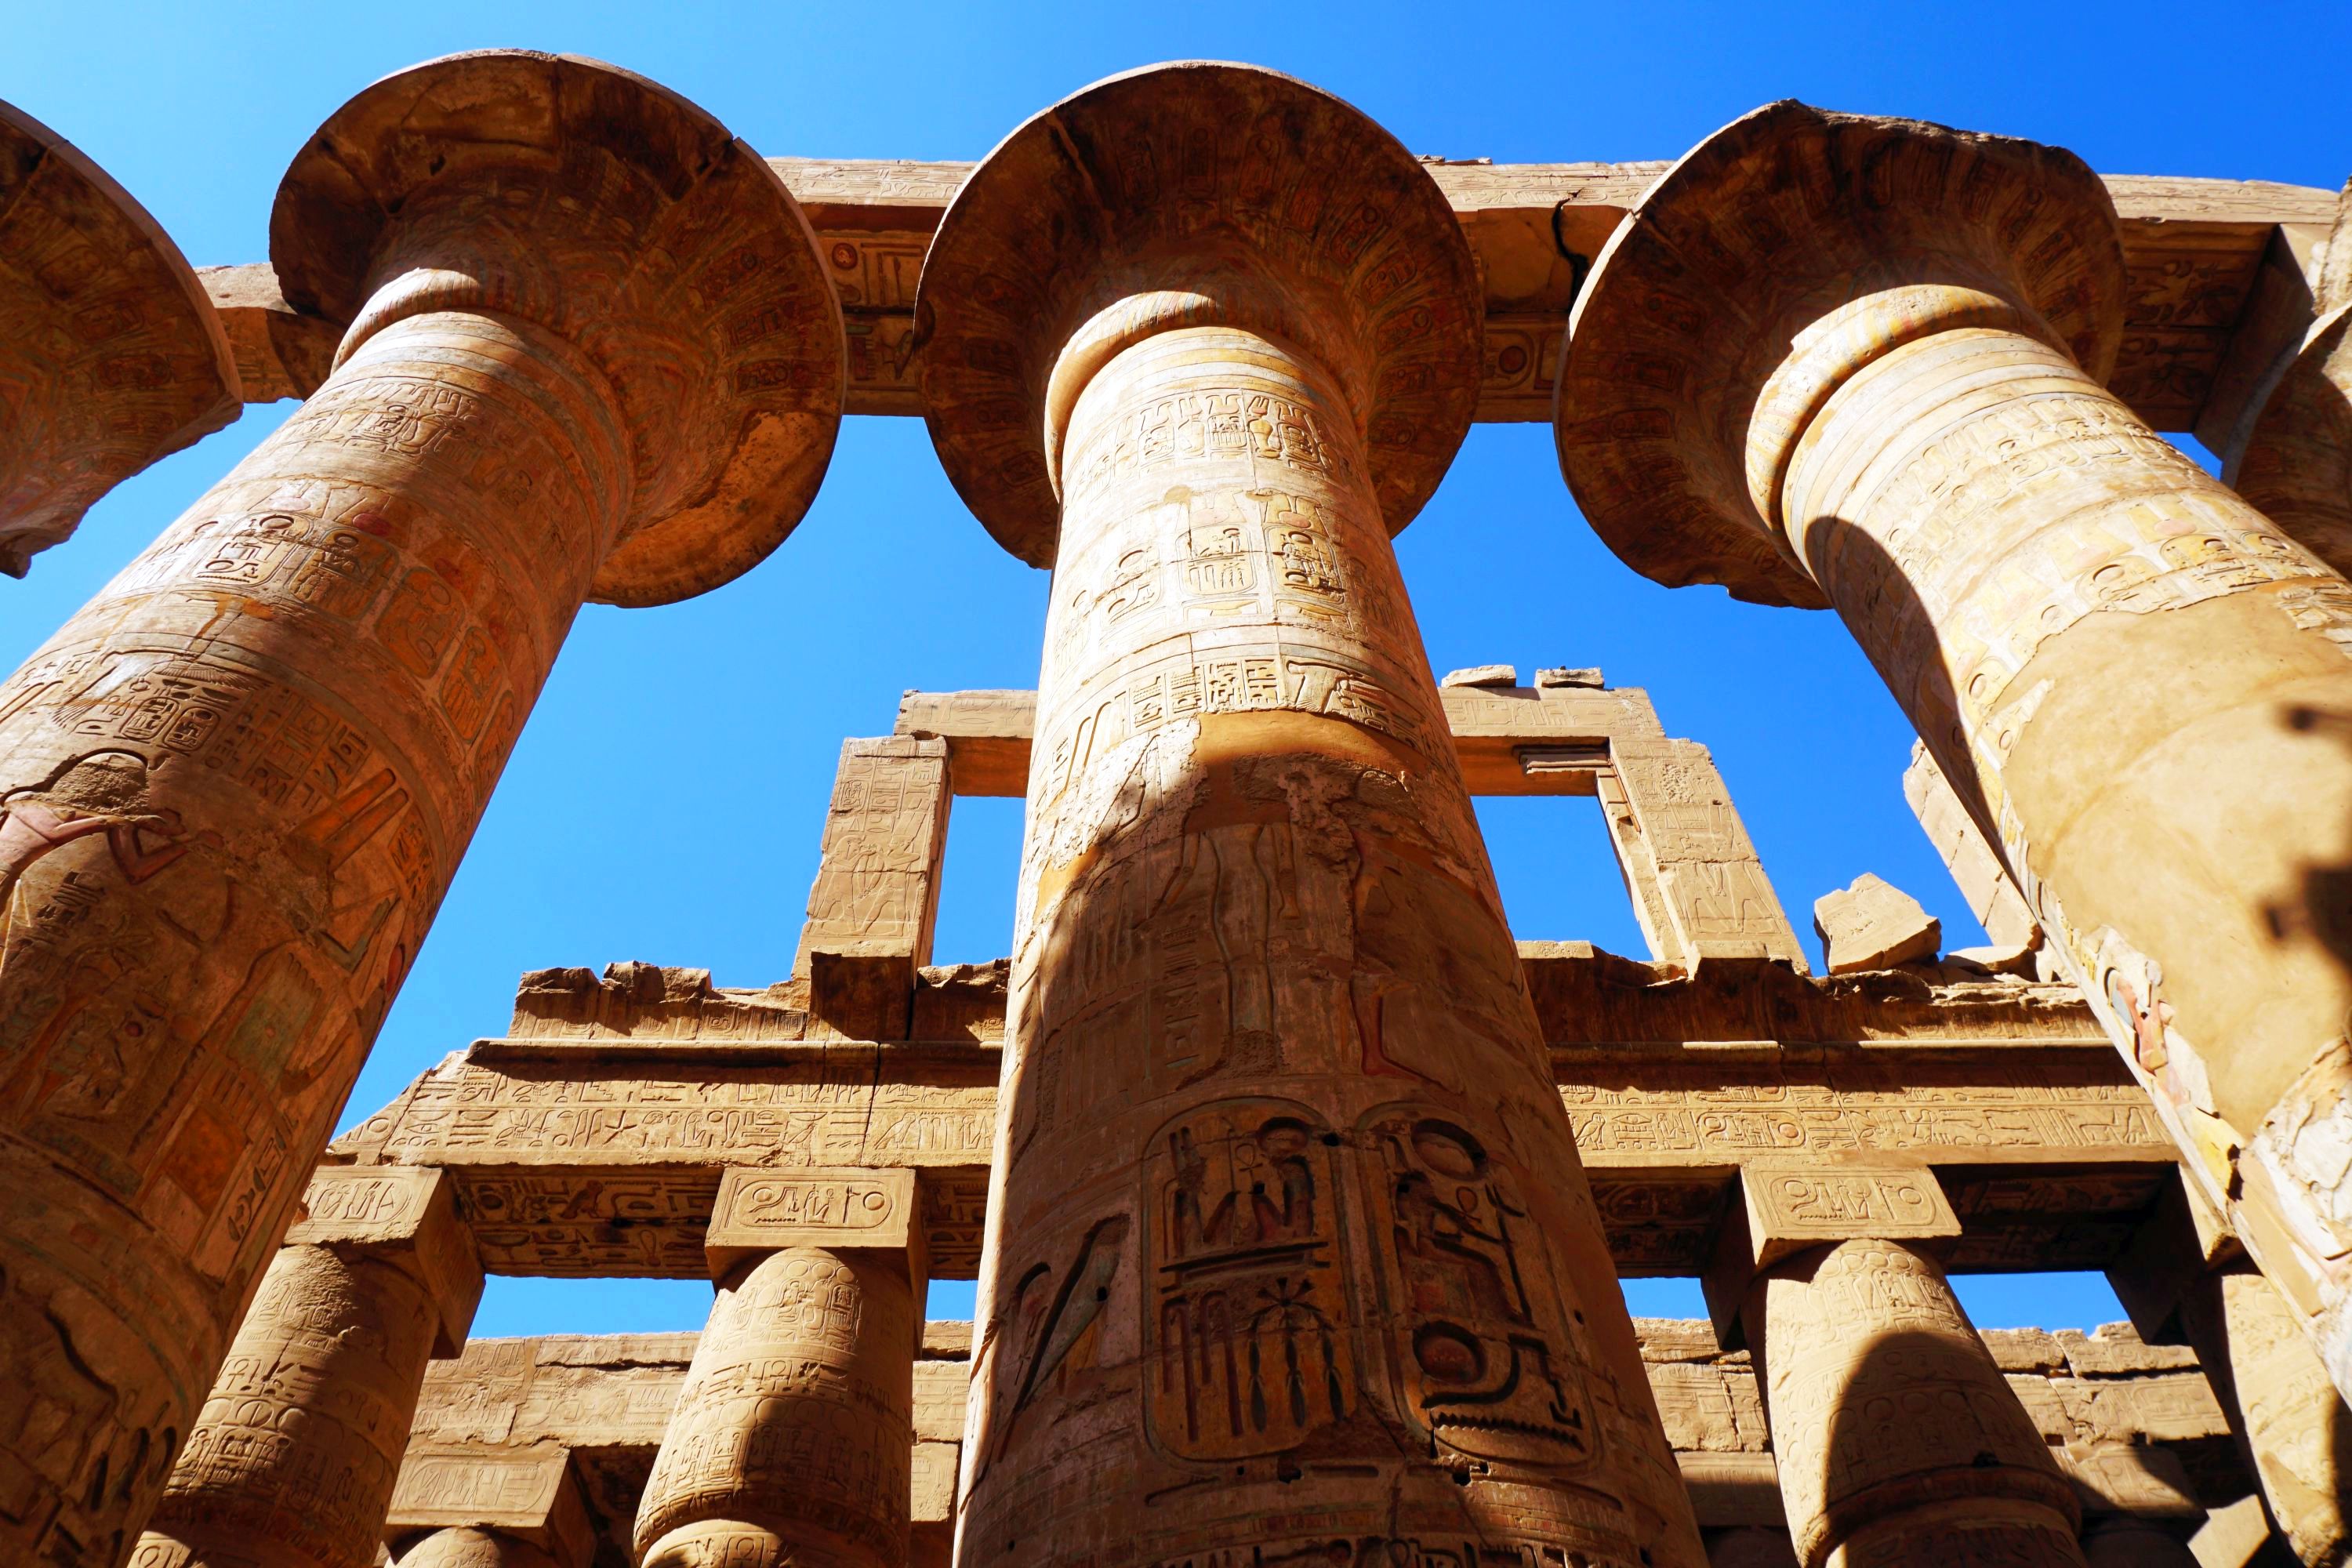 Karnak Temple, Luxor Temple, and Luxor Museum